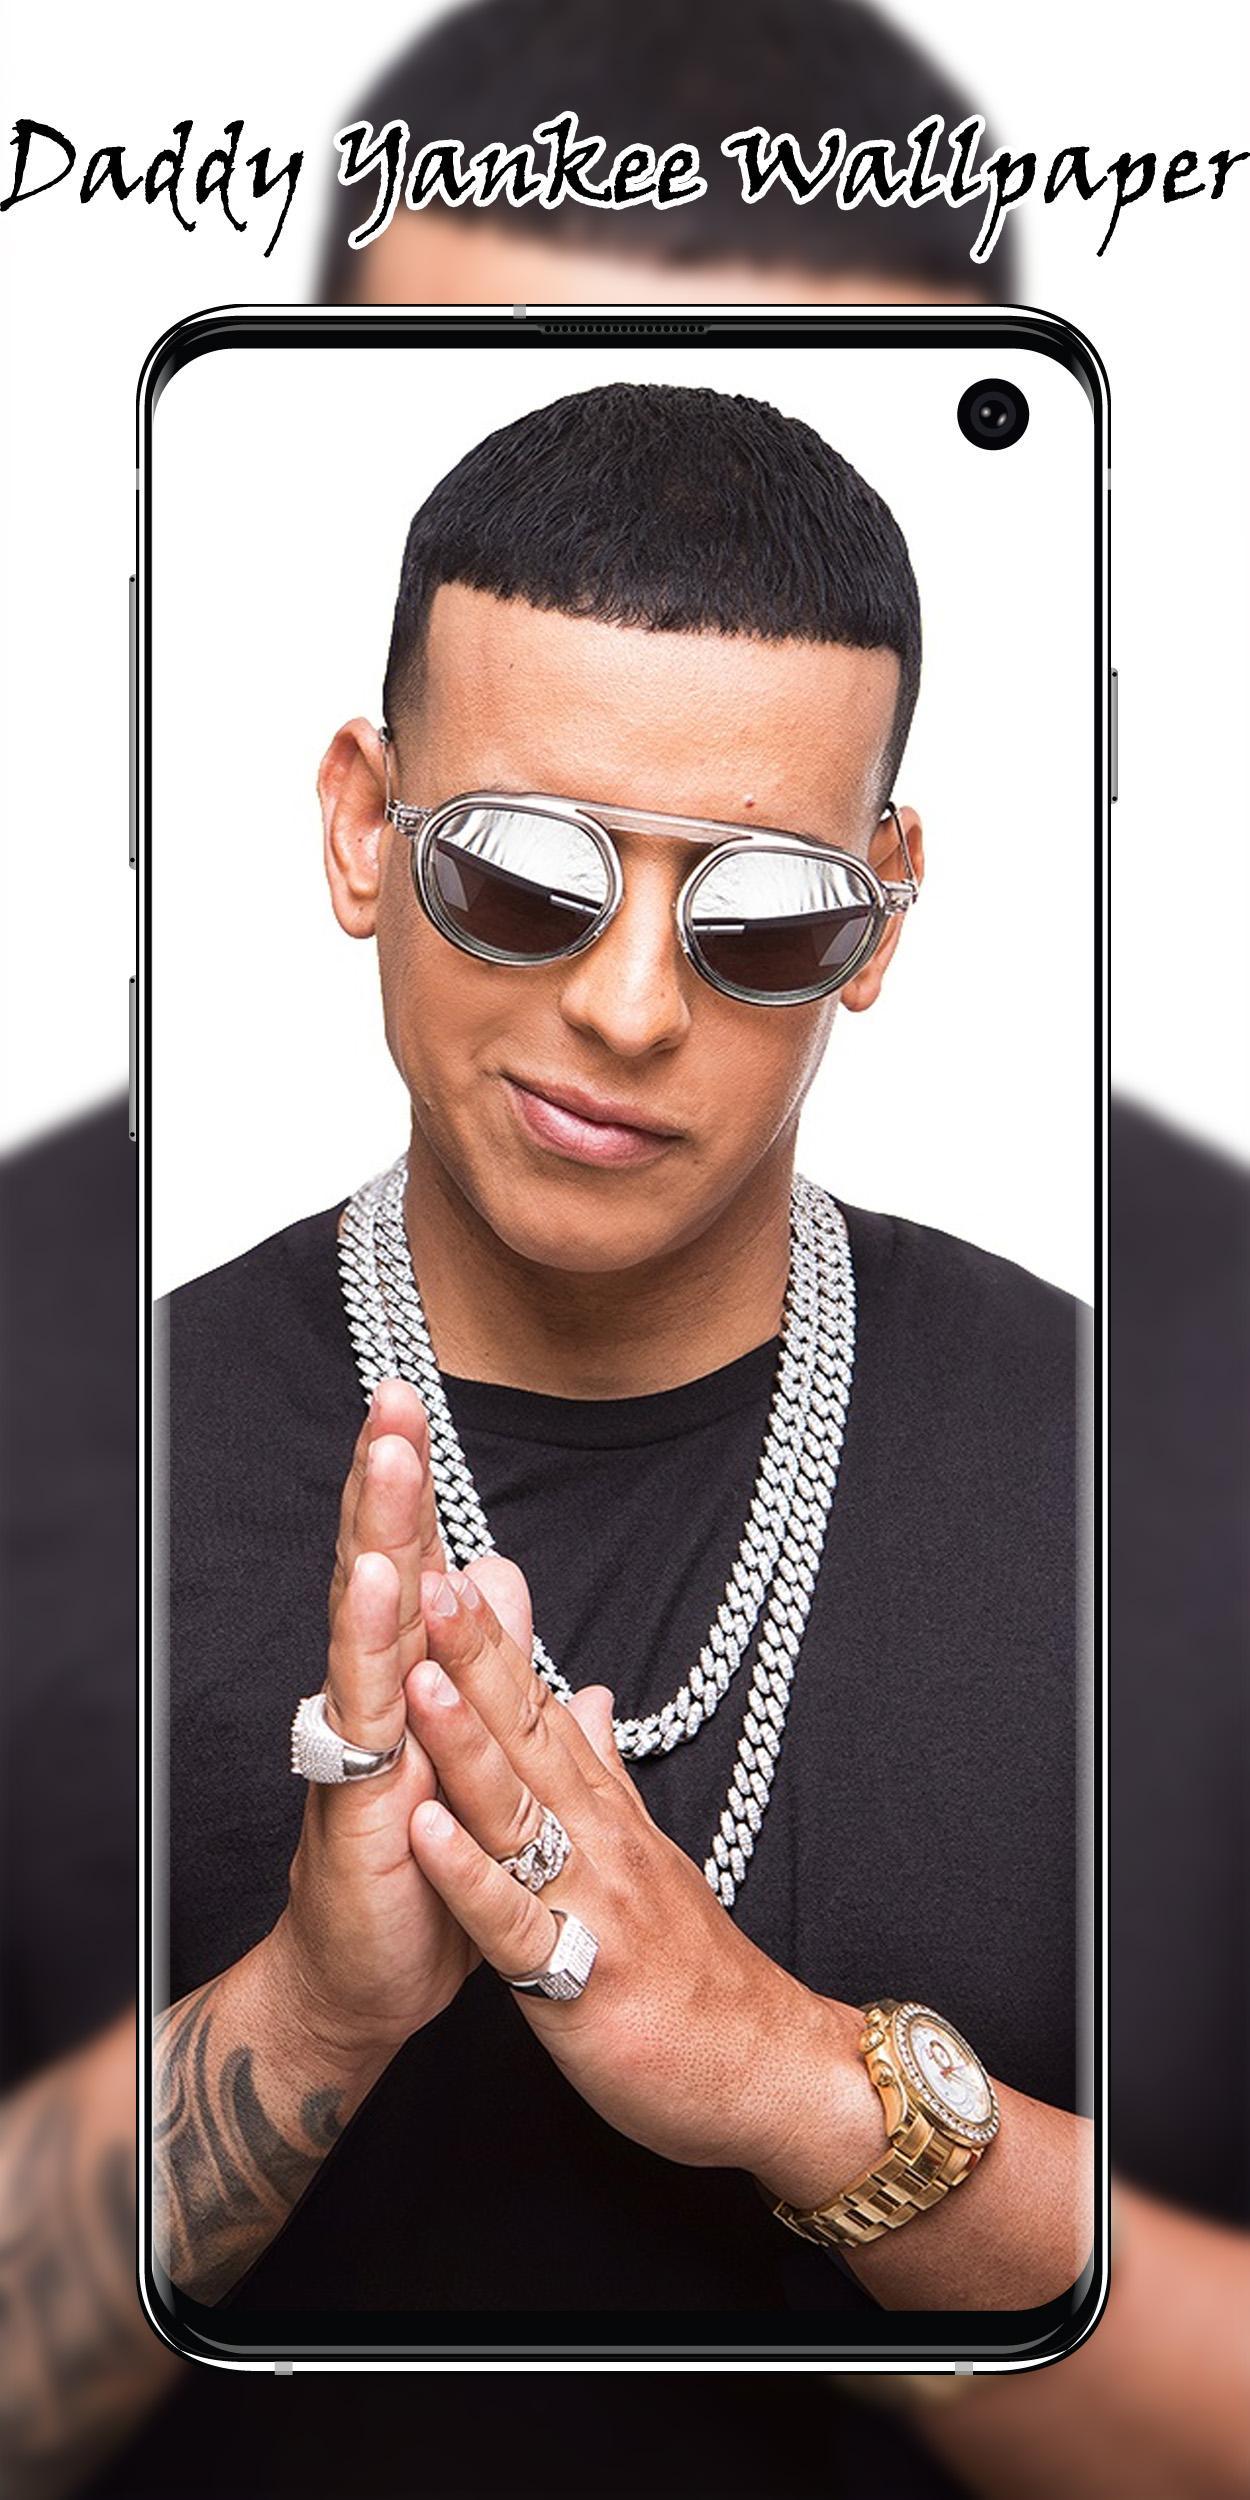 Daddy android. Daddy Yankee. Daddy Yankee фото.